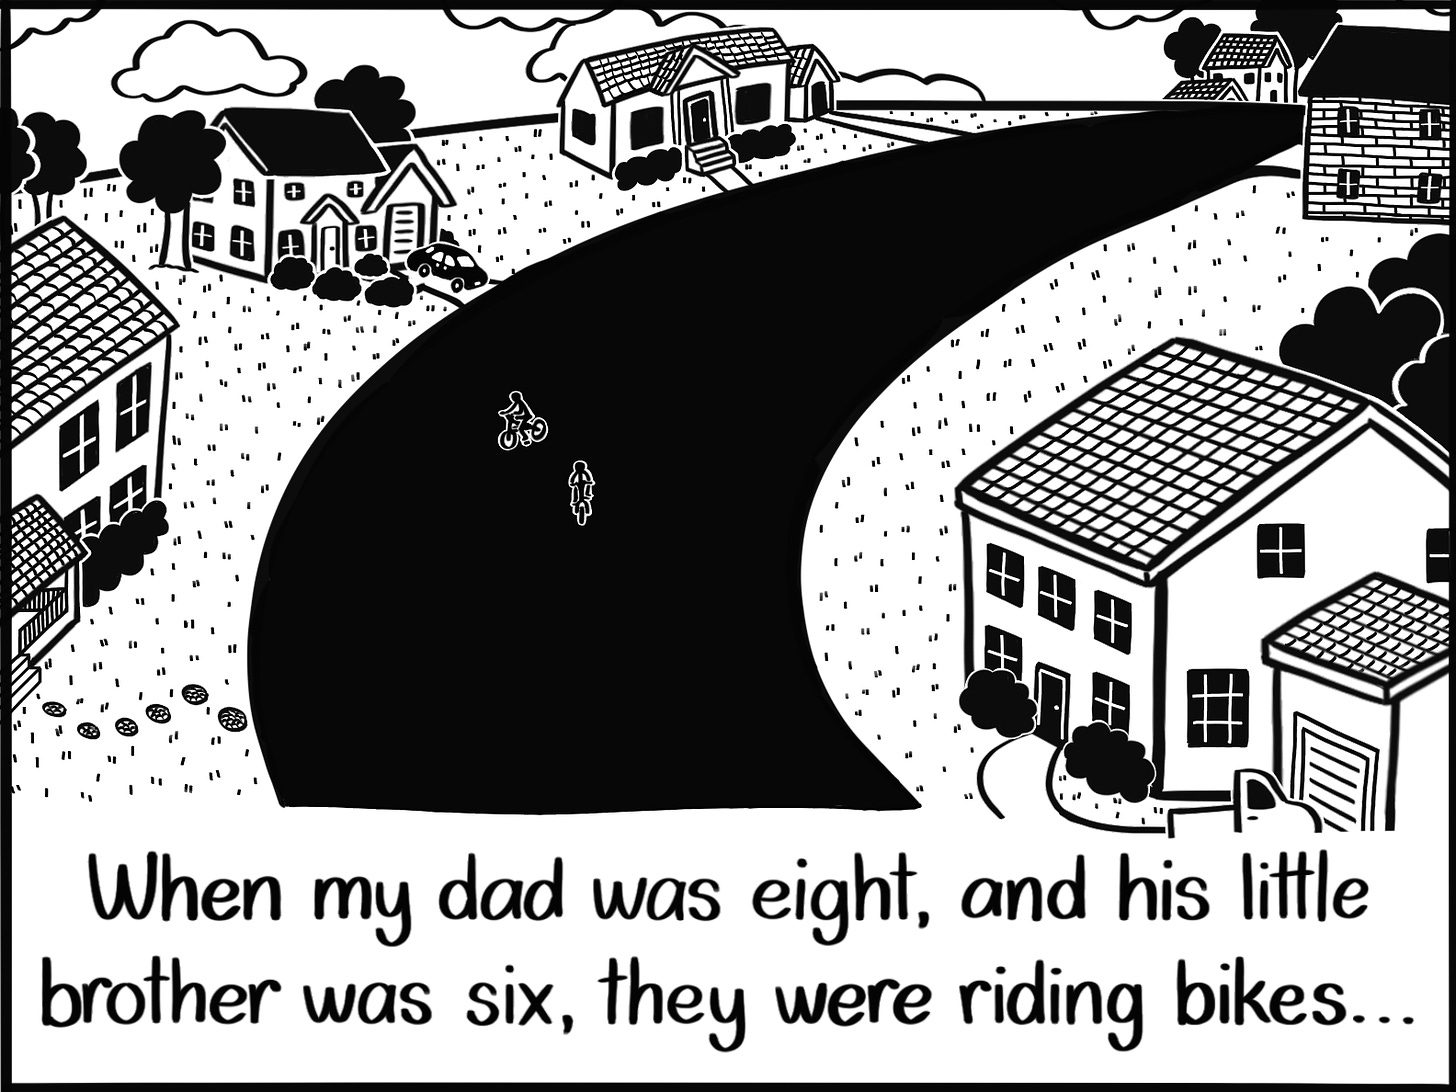 Caption: When my dad was eight, and his little brother was six, they were riding bikes... Image: A wide view of a suburban neighborhood, with two small figures on bicycles in the middle of the street.